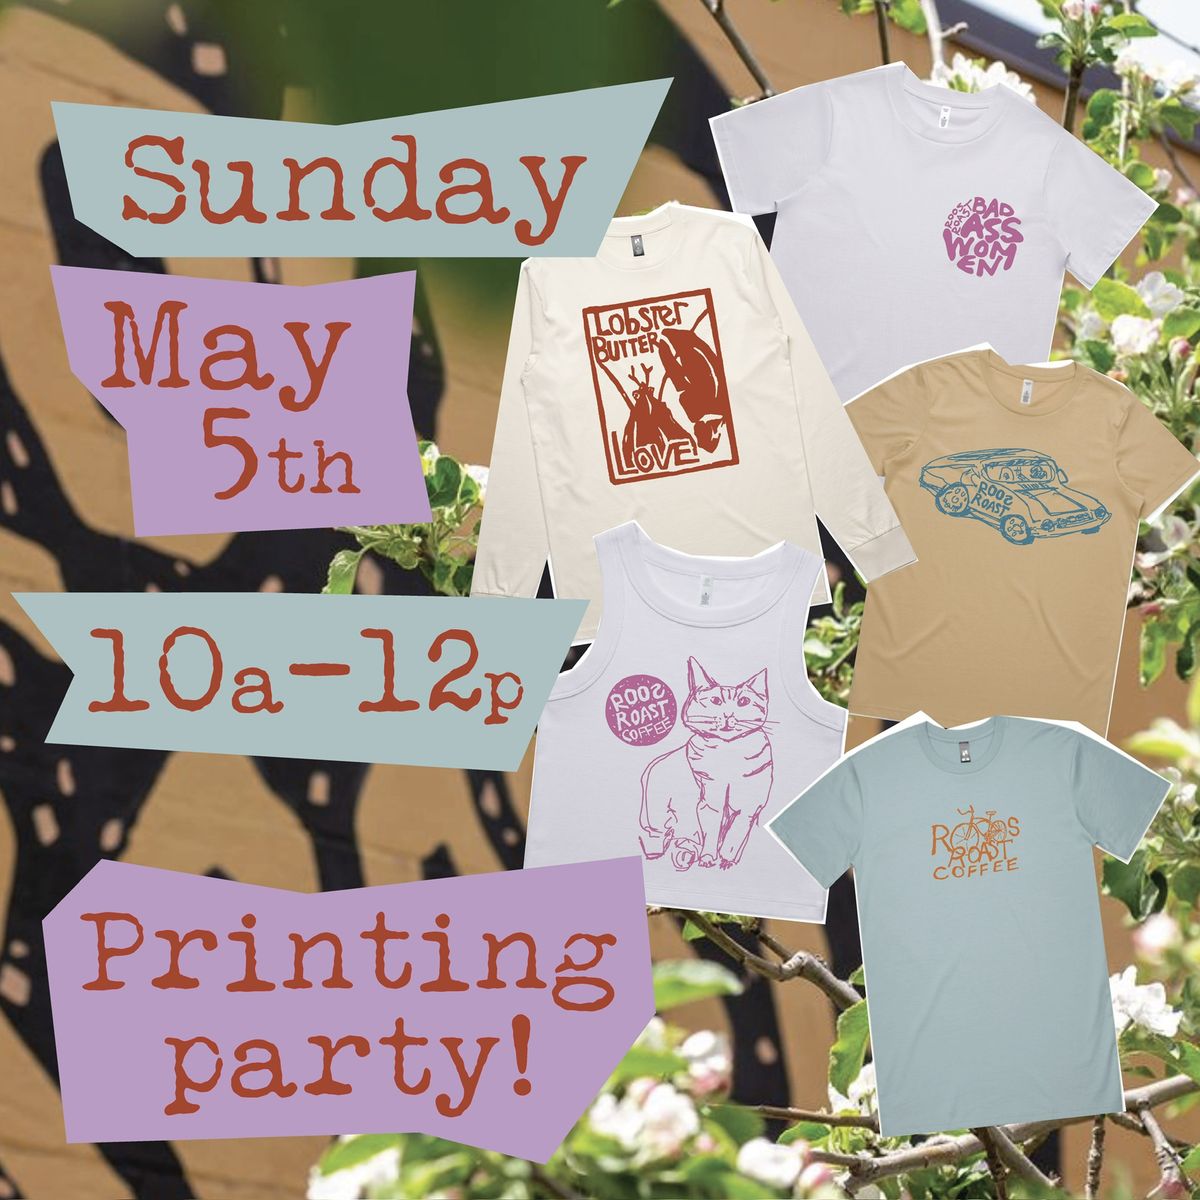 Free Screen Printing Party @ RoosRoast on Rosewood!